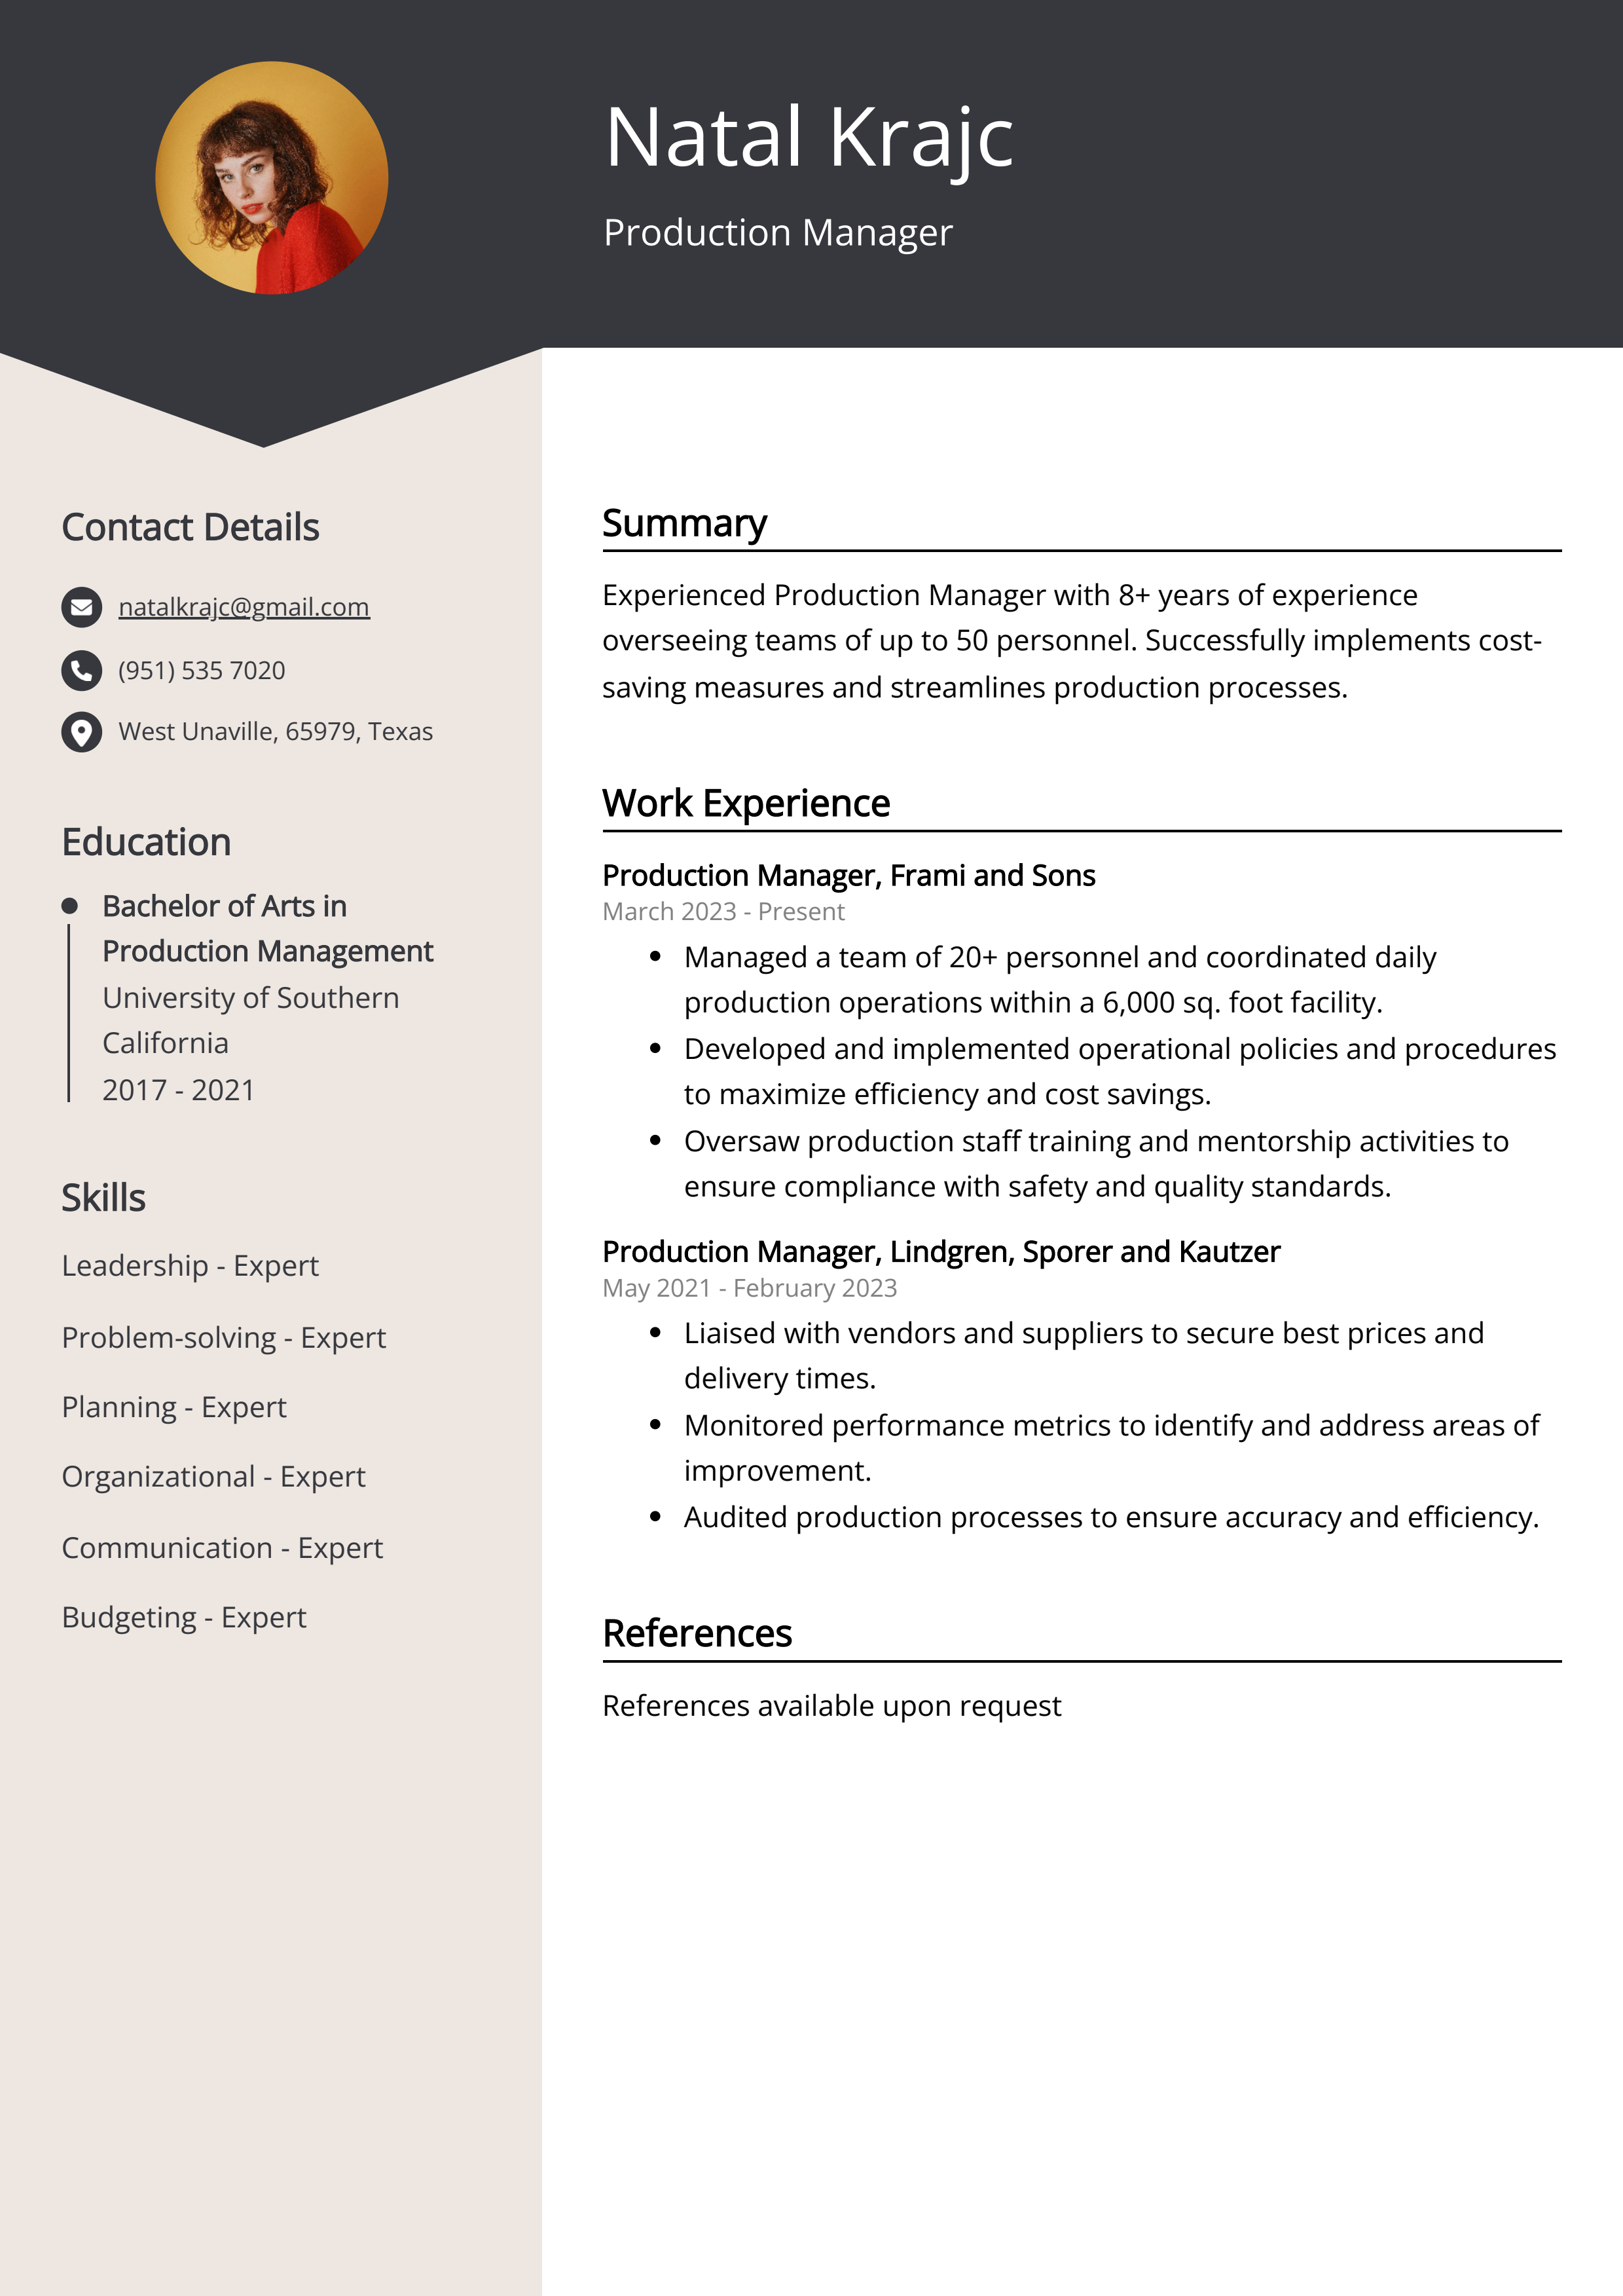 Production Manager CV Example